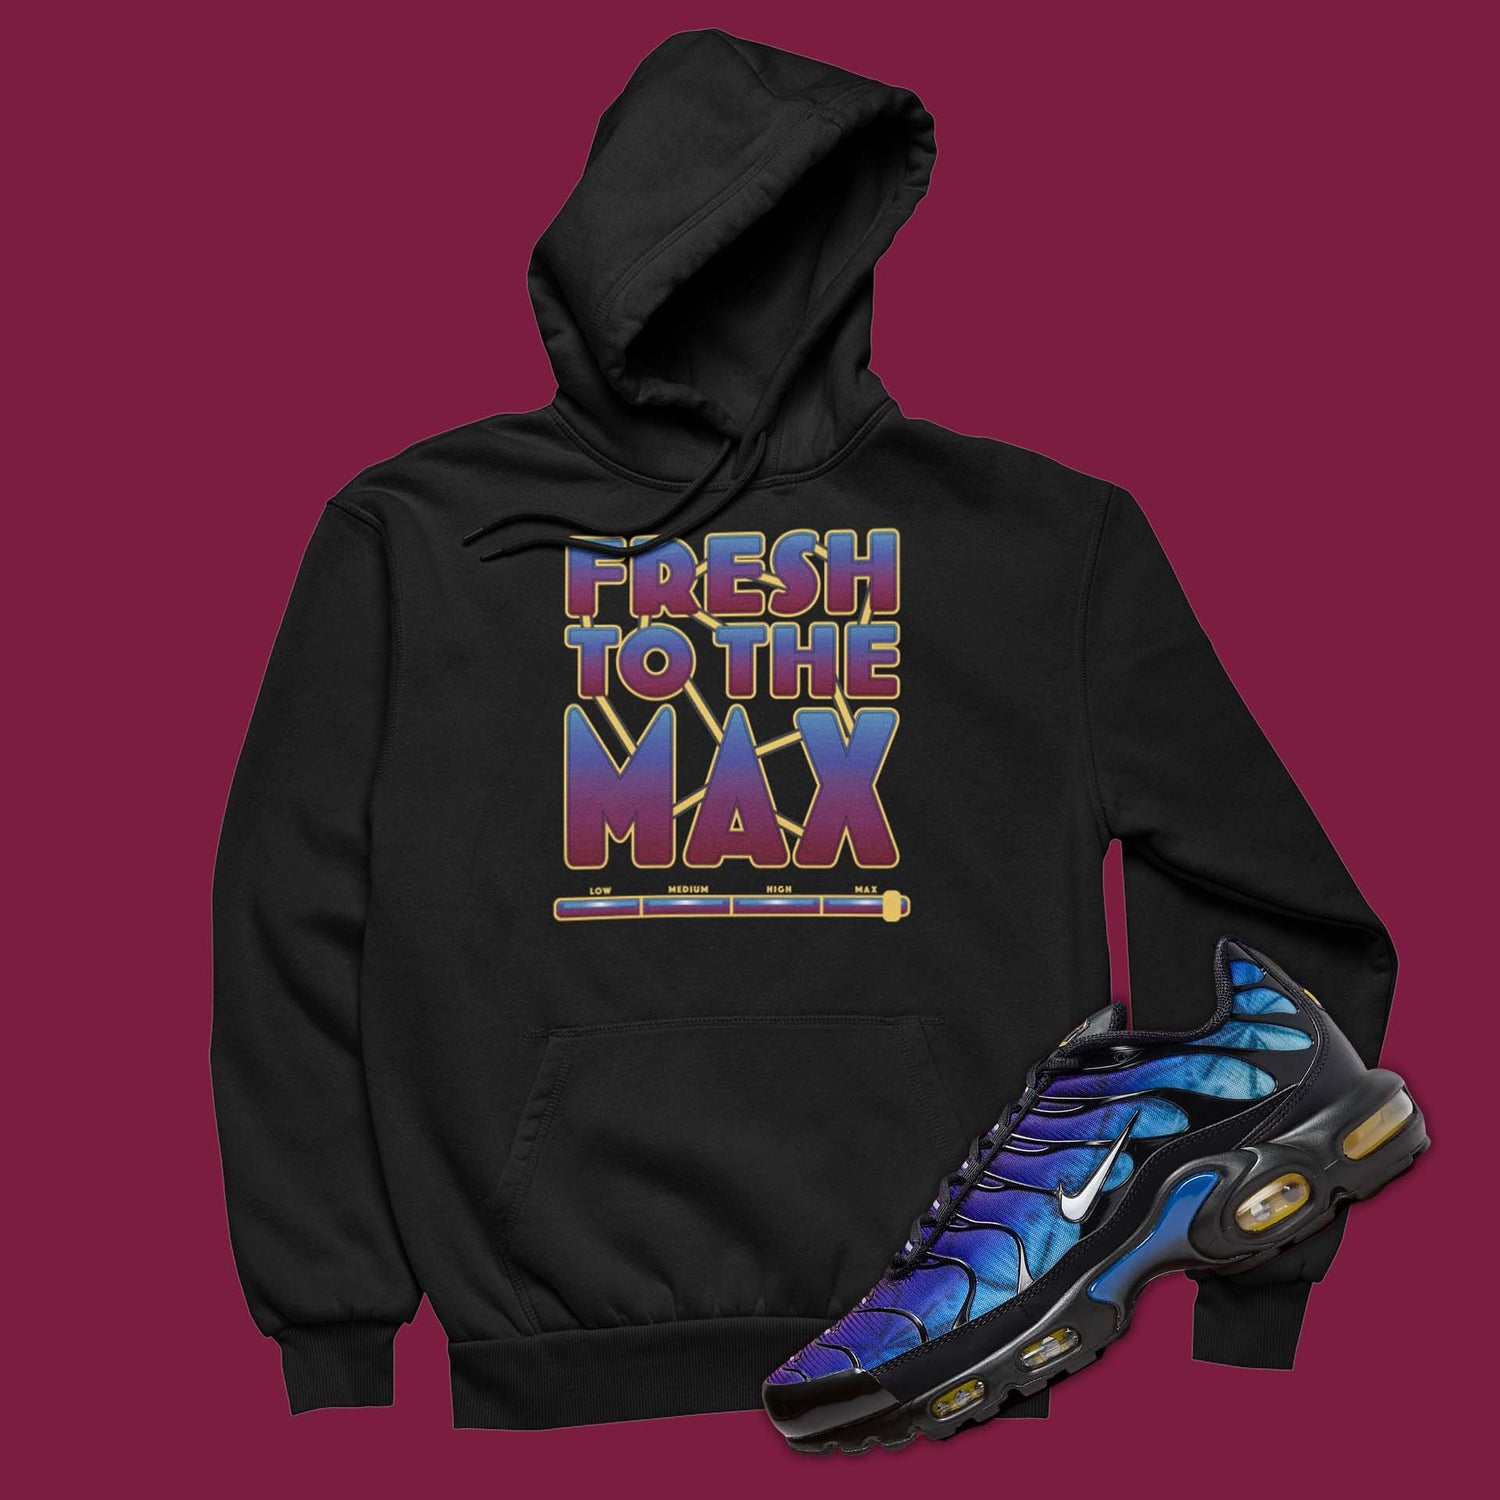 Air Max 25th Anniversary Matching Hoodie from SNKADX